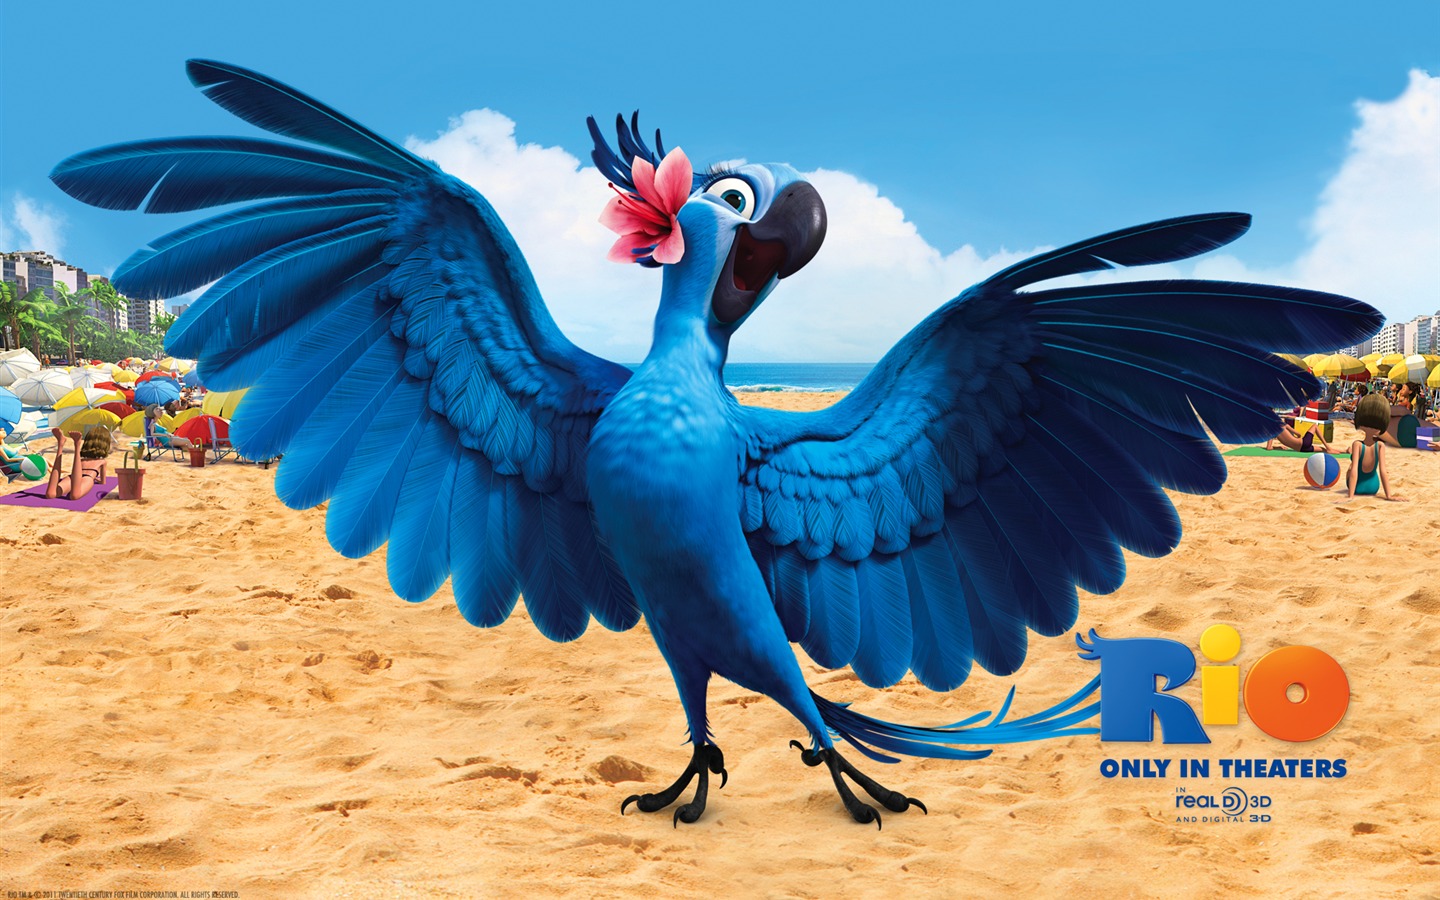 Rio 2011 wallpapers #1 - 1440x900